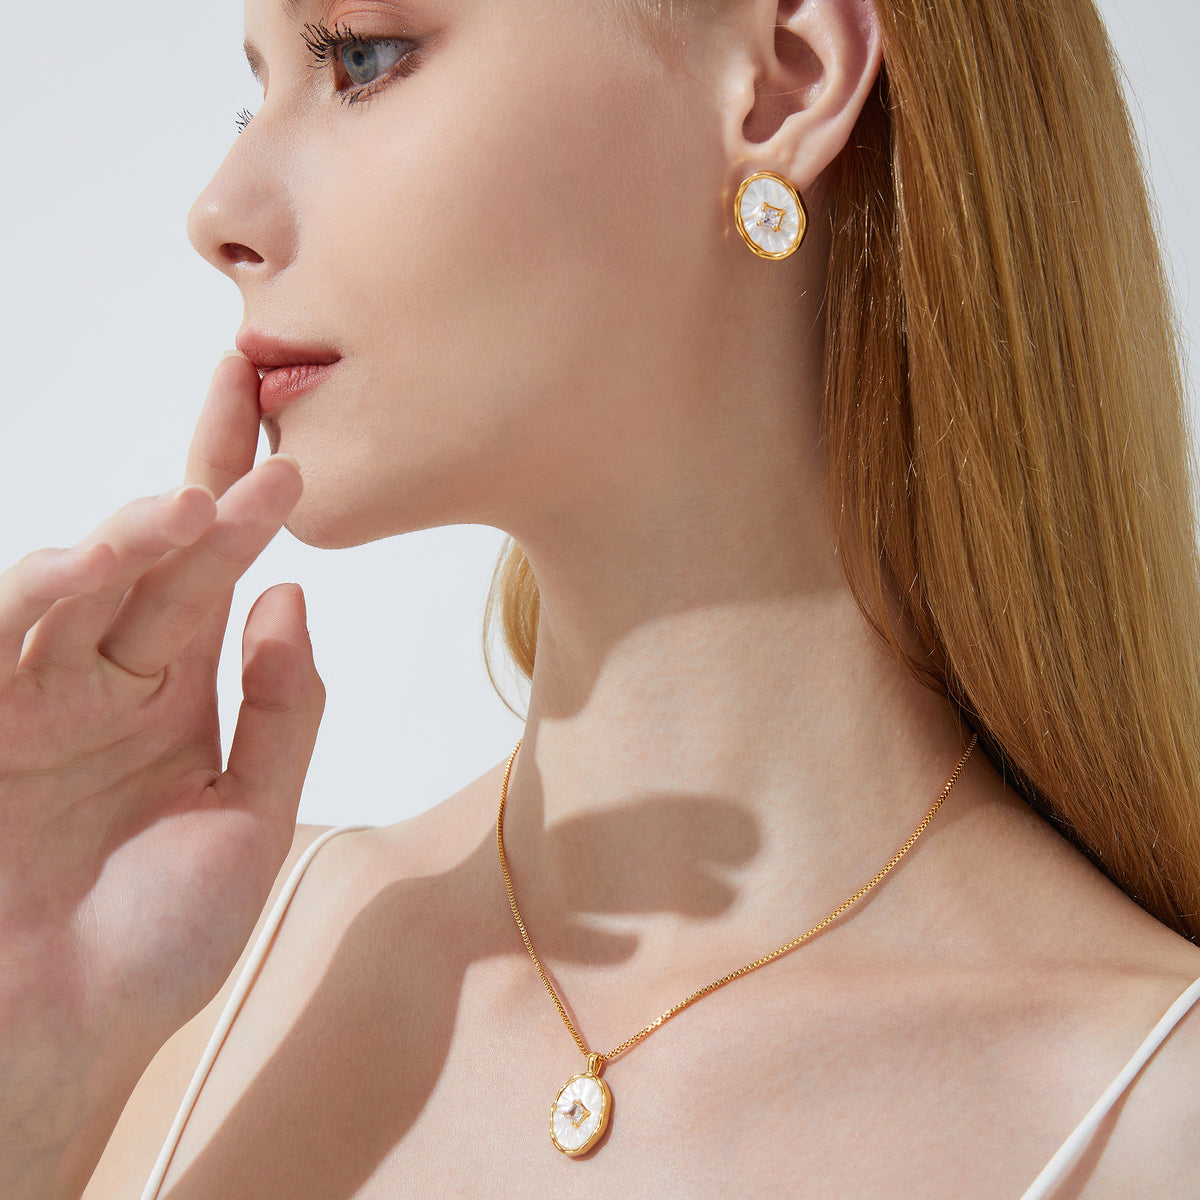 Ethereal Lumière - 18K Natural Mother-of-Pearl & Zircon Stud Earrings & Necklace Jewelry Set